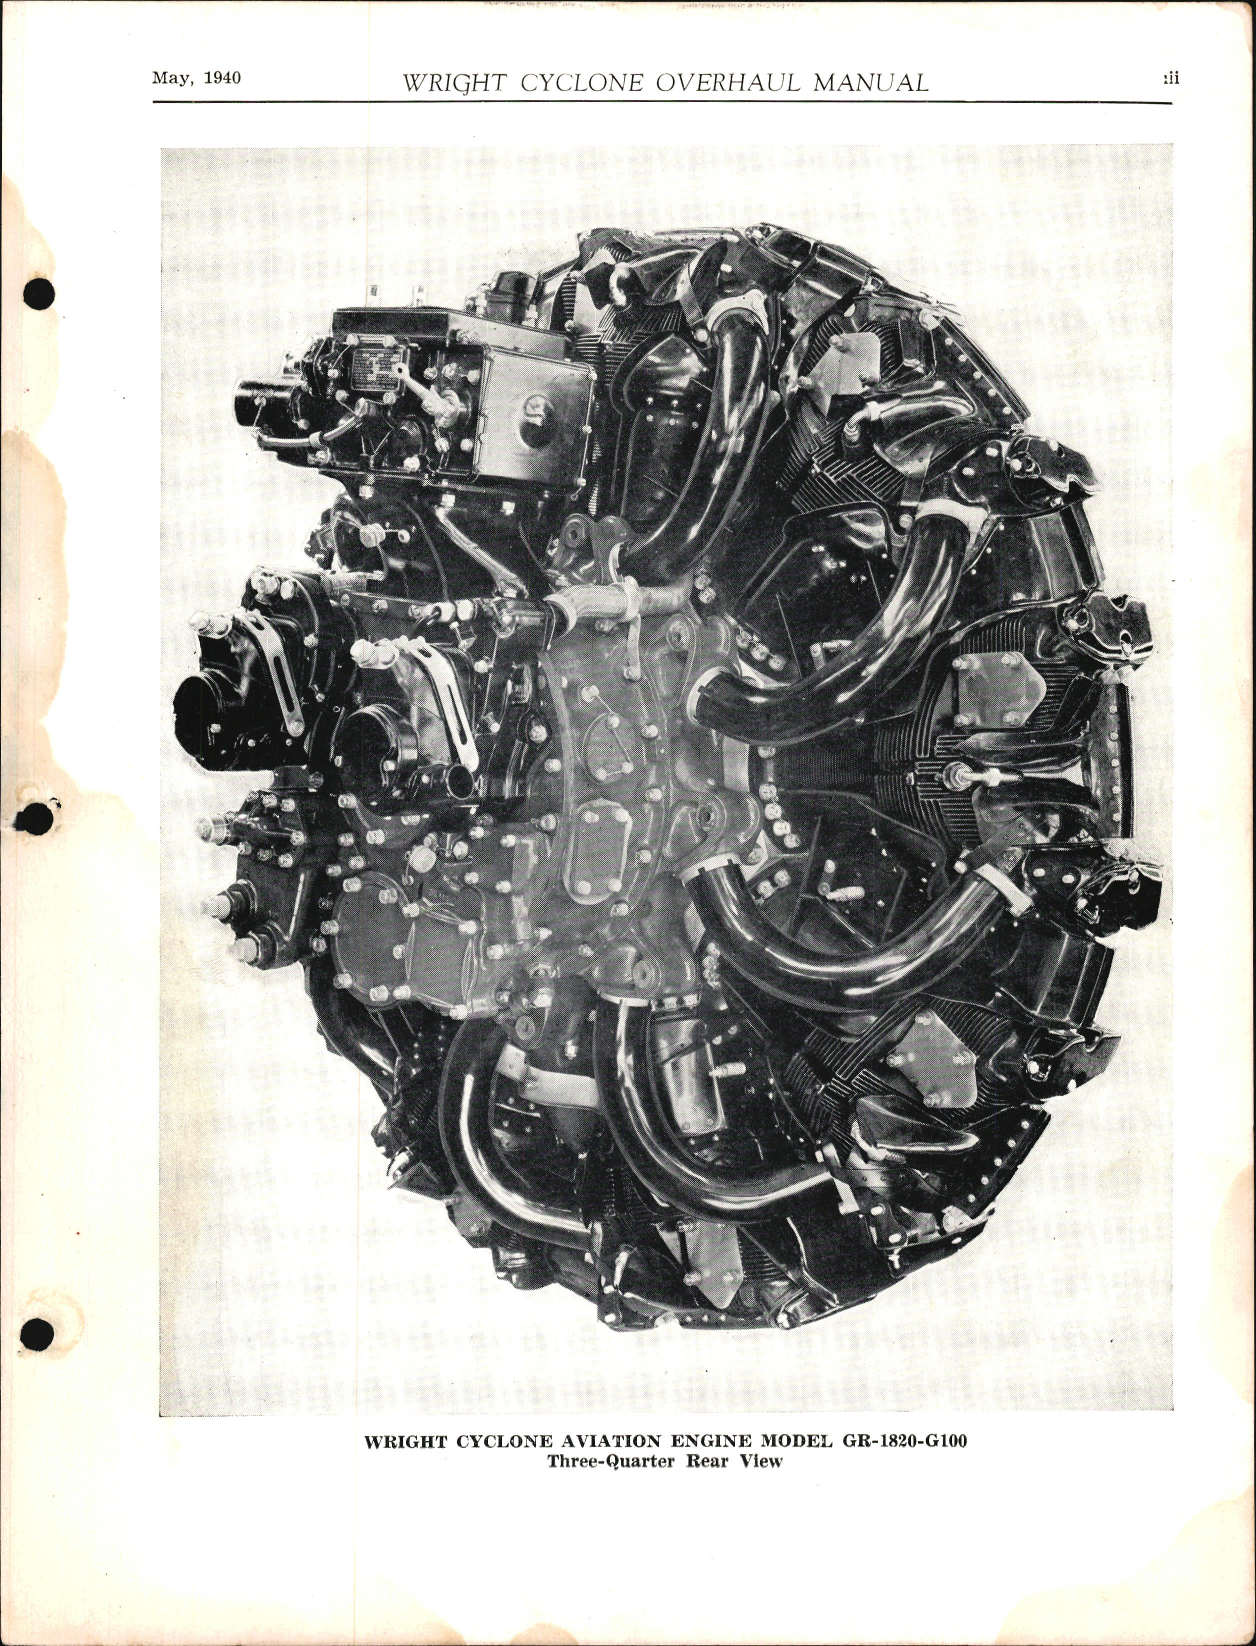 Sample page 5 from AirCorps Library document: Overhaul Manual for Wright Cyclone Engines - Direct and Geared Drives